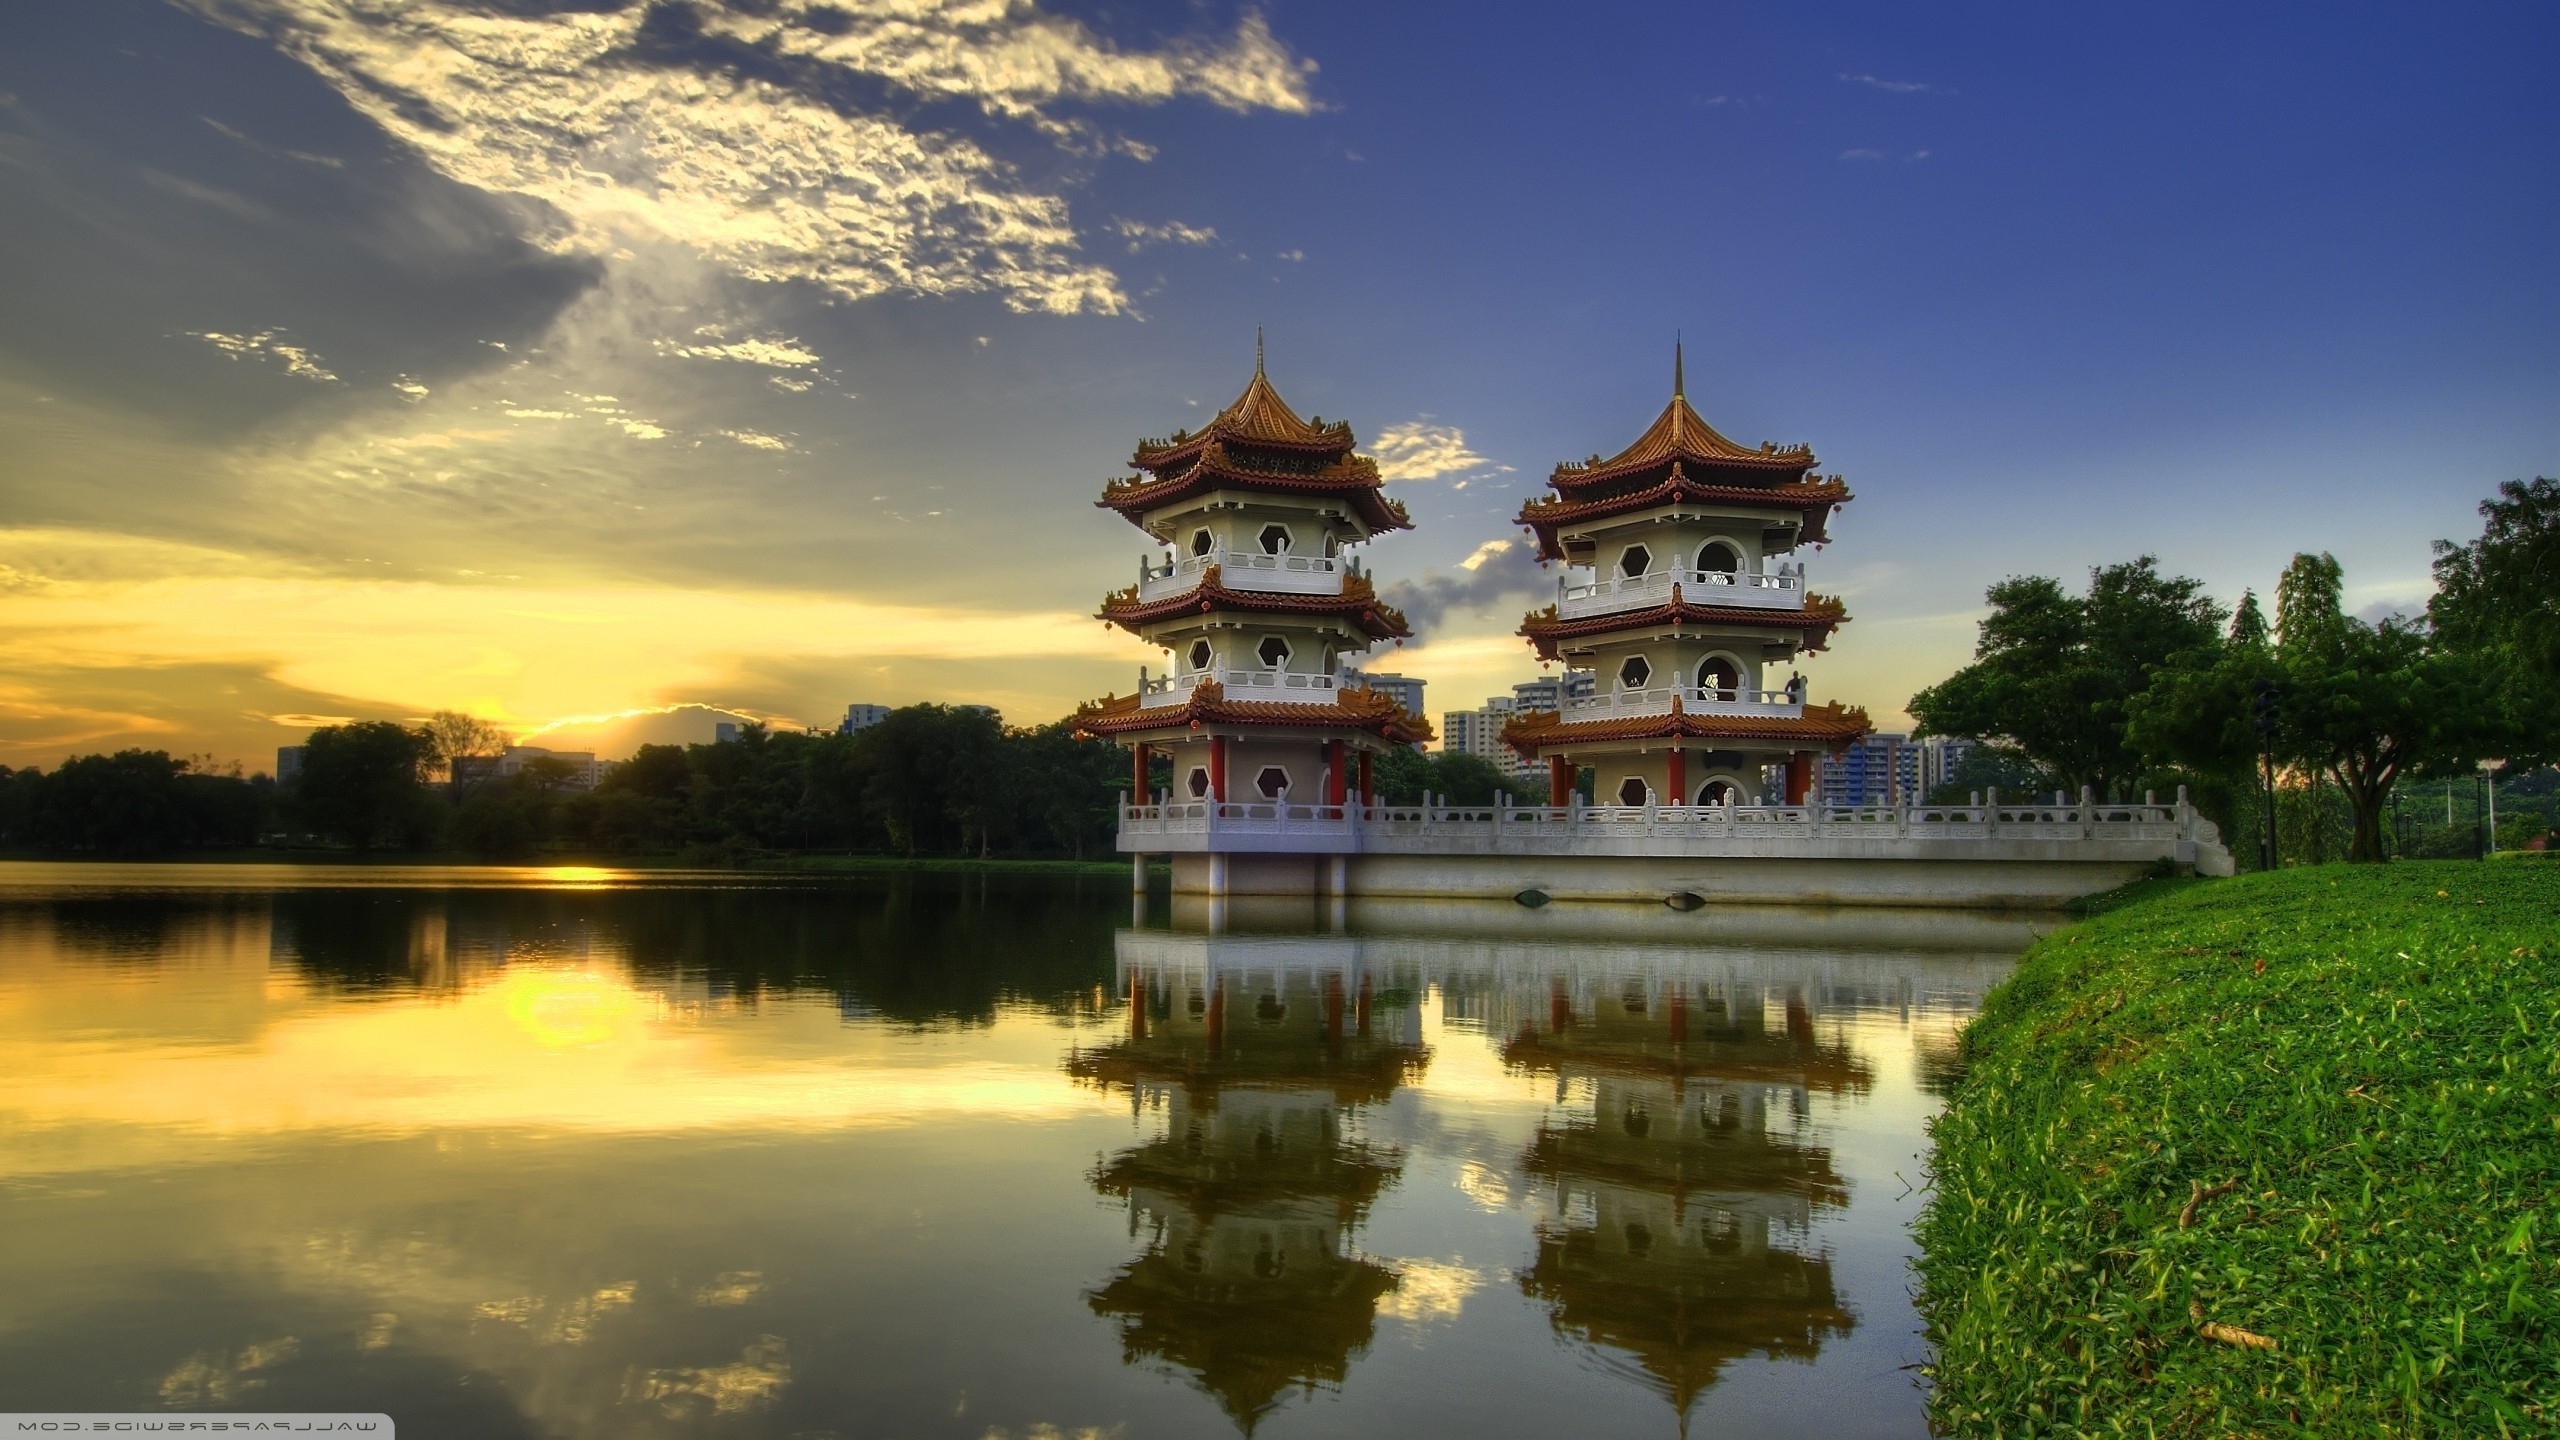 Wallpaper, temple, trees, landscape, forest, Singapore, Asian architecture, lake, water, nature, reflection, grass, clouds, evening, tower, Sun, dusk, pagoda, palace, landmark, 2560x1440 px, place of worship 2560x1440